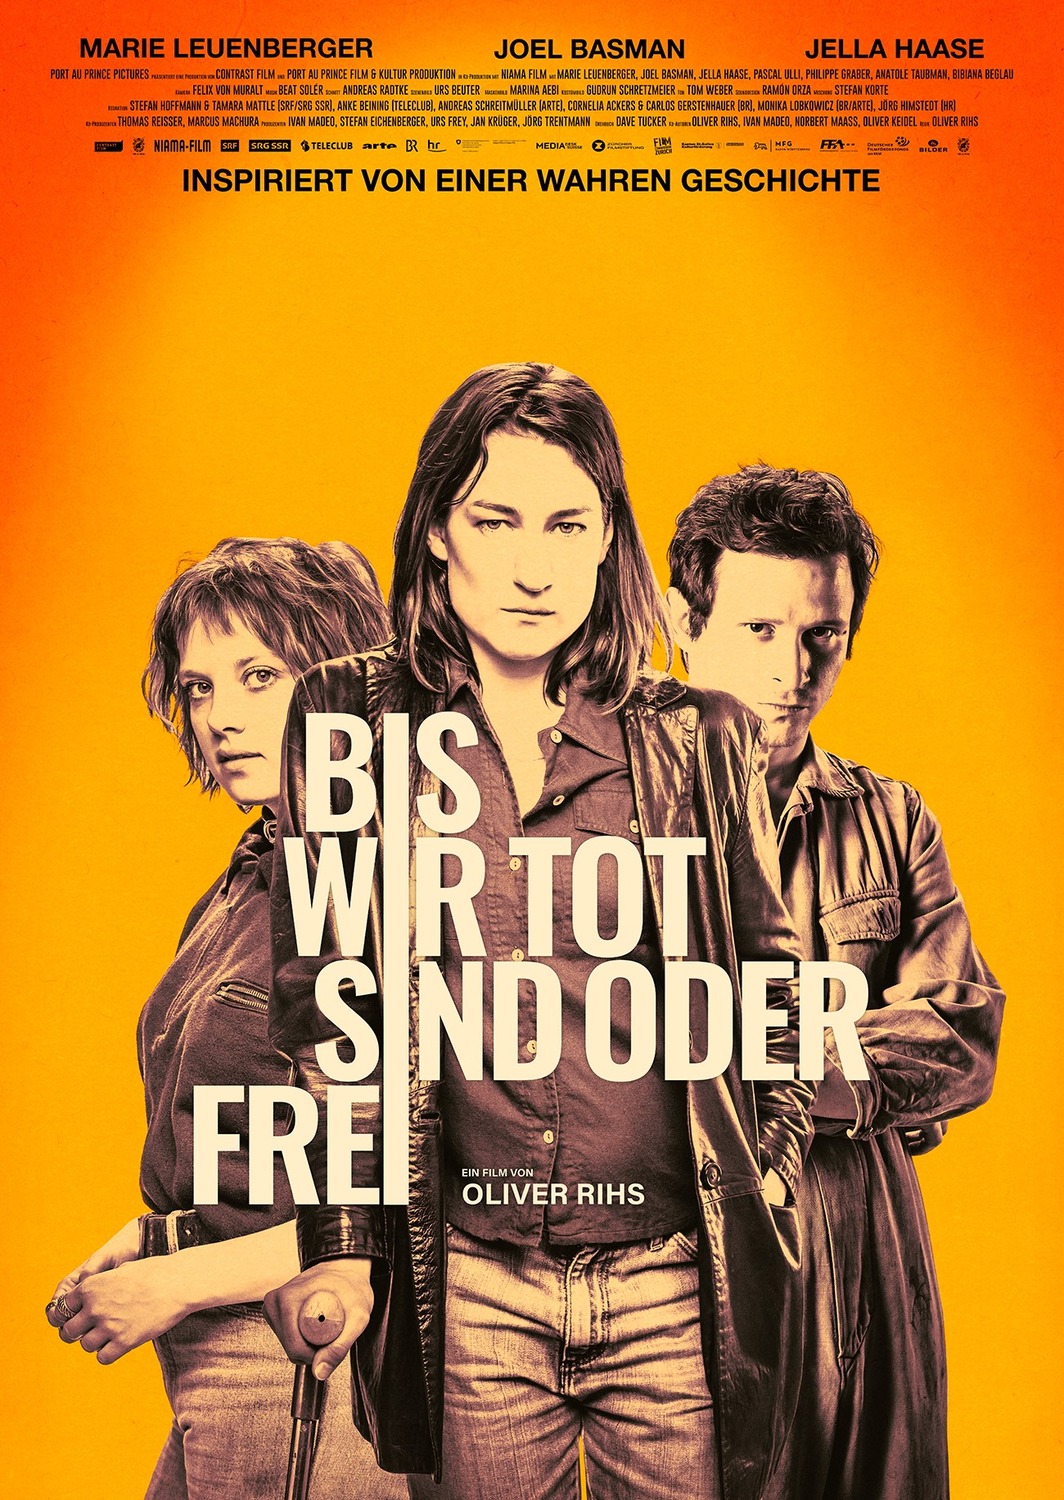 Extra Large Movie Poster Image for Bis wir tot sind oder frei (#1 of 2)